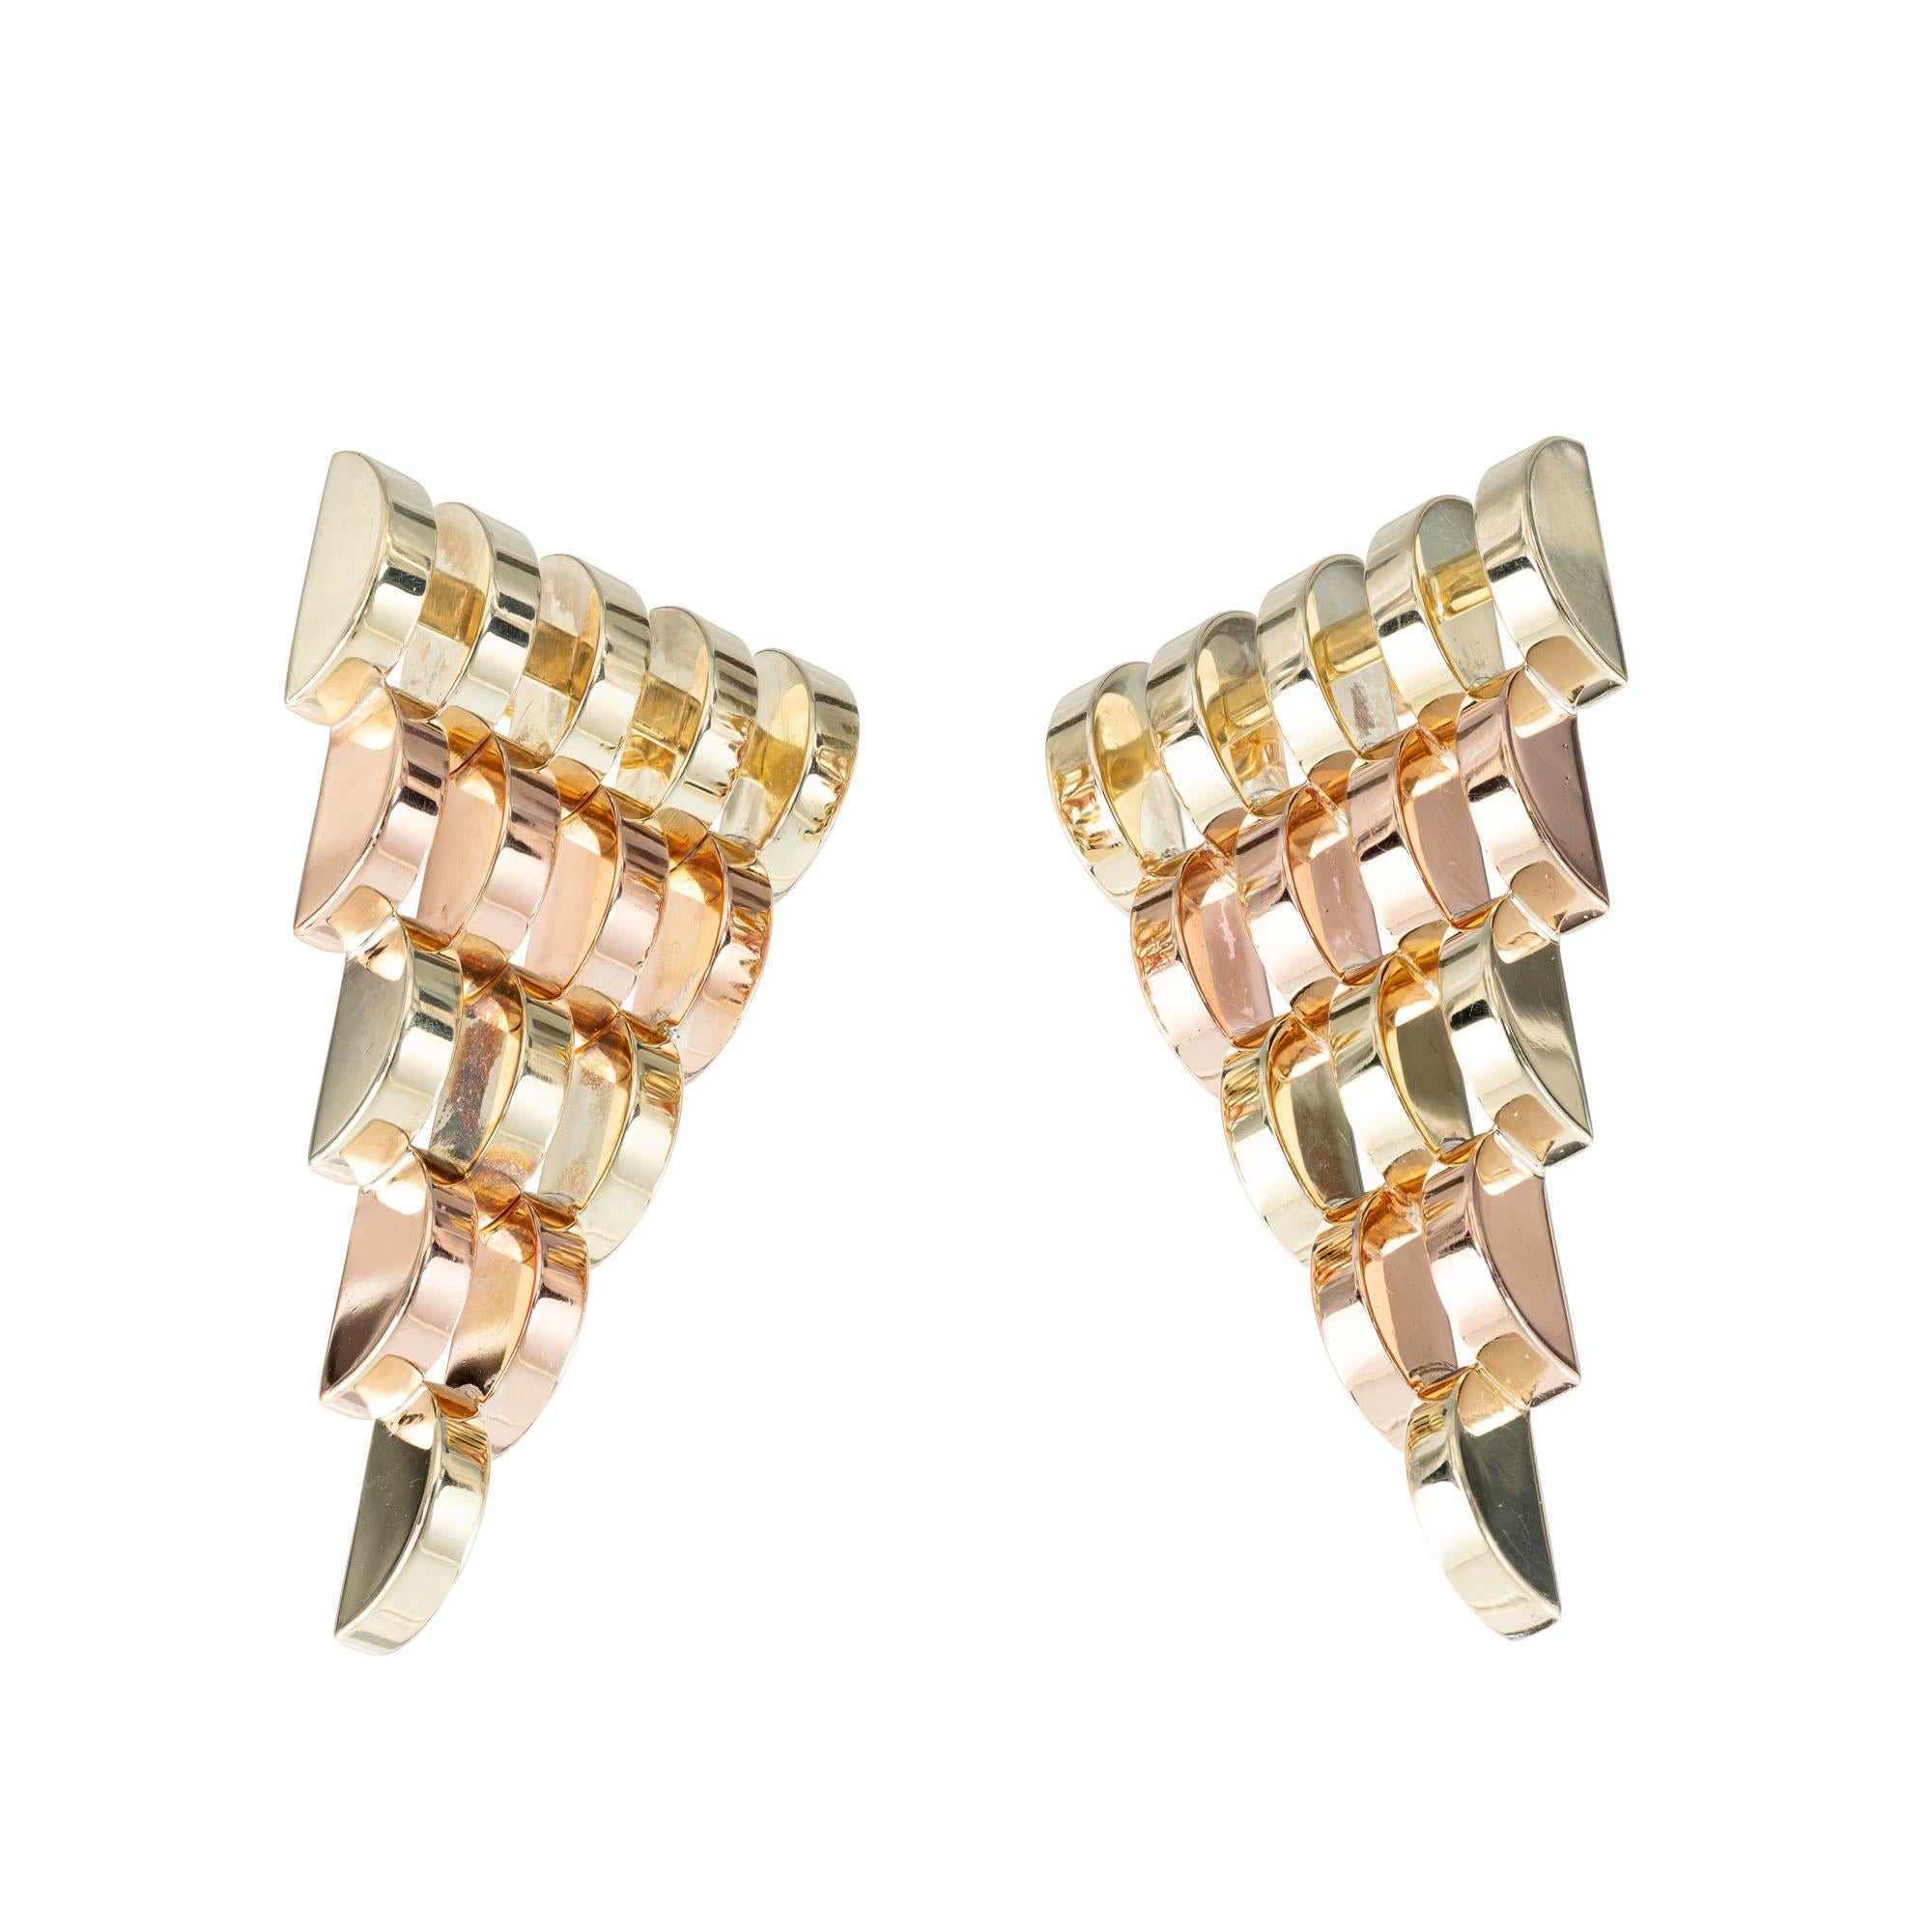 Retro 1940's rose and green gold tapered pierced earrings.

14k rose and green gold
Tested: 14k
Hallmark: 714094
15.8 grams
Top to bottom: 45.14mm or 1.77 inches
Width: 23.65mm or .93 inch
Depth: 5.28mm
